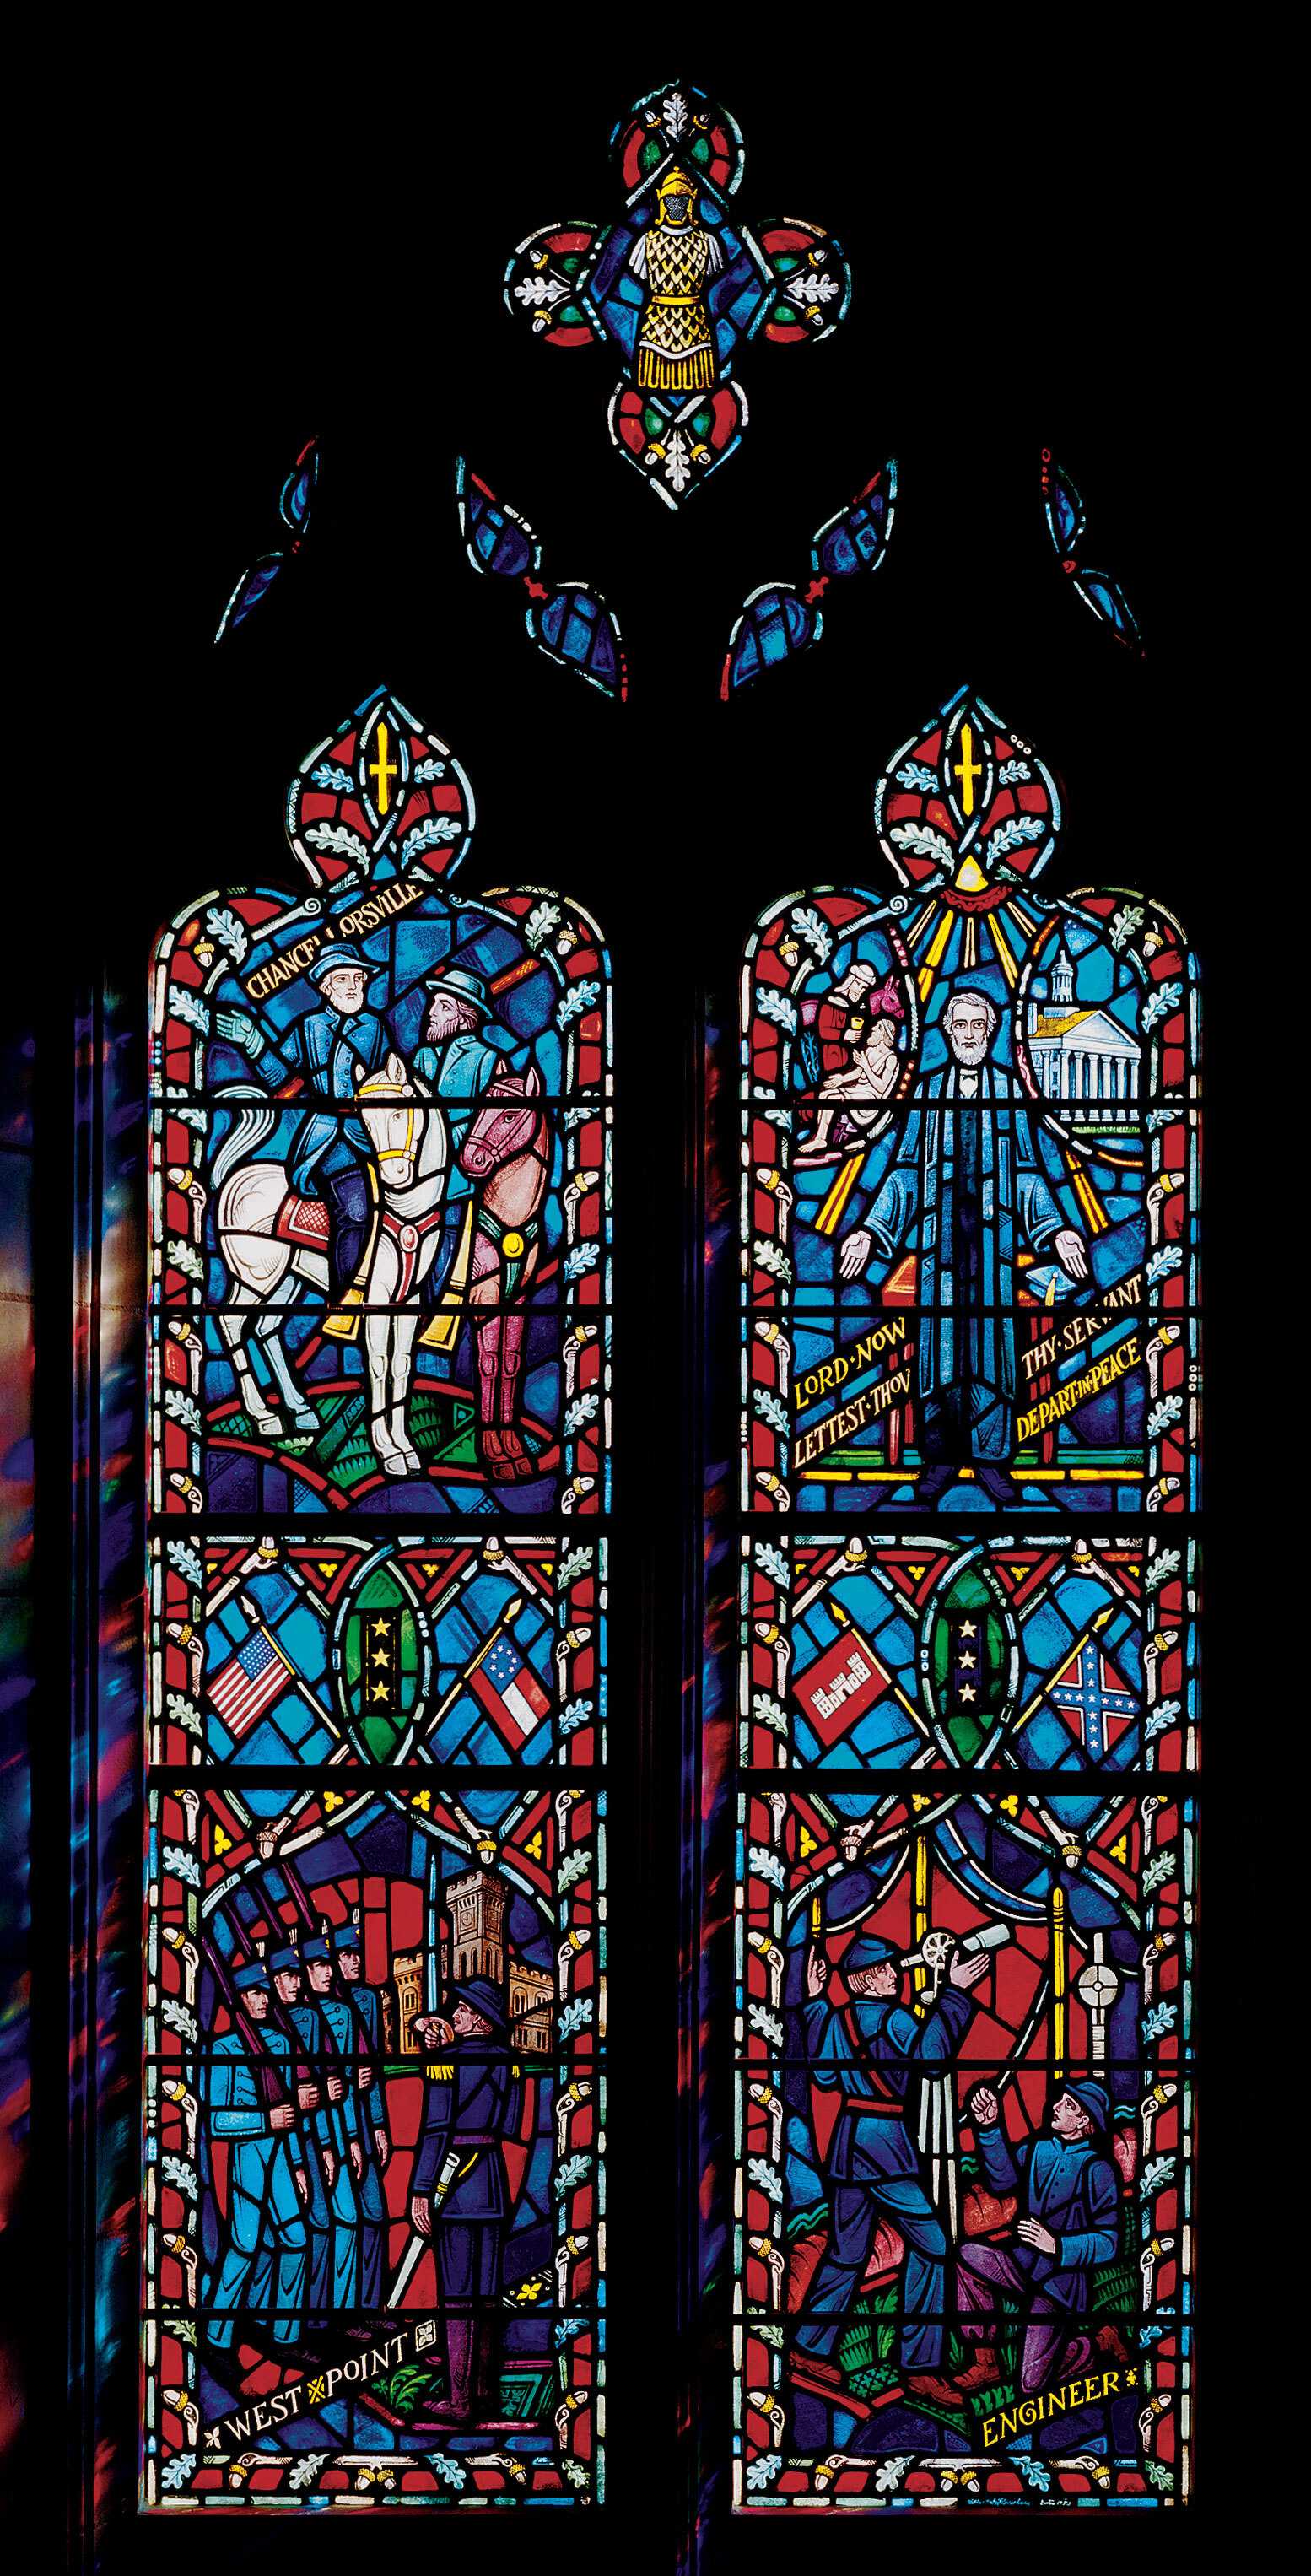 Double pained stained glass window glorifying the life of Confederate General Robert E. Lee.  There are four different scenes depicting his life as Engineer, West Point, Chancellorsville and him in Eternal Life